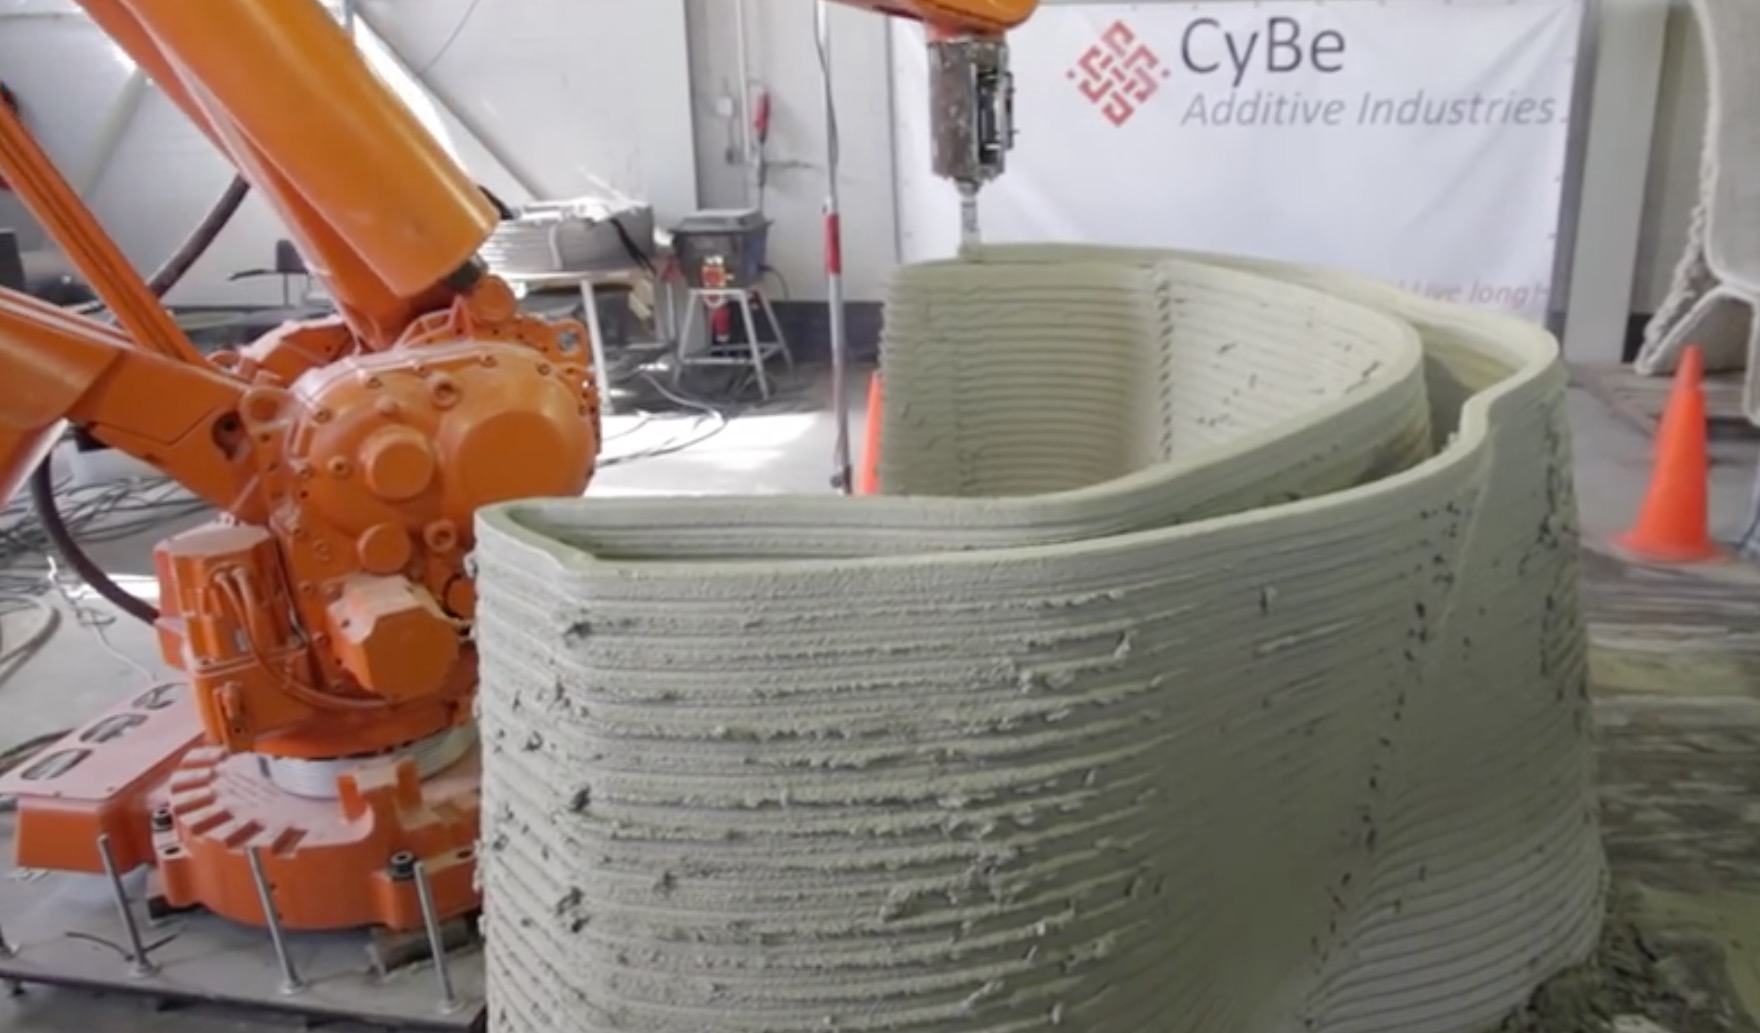 cybe6_concrete_3d_printing_construction